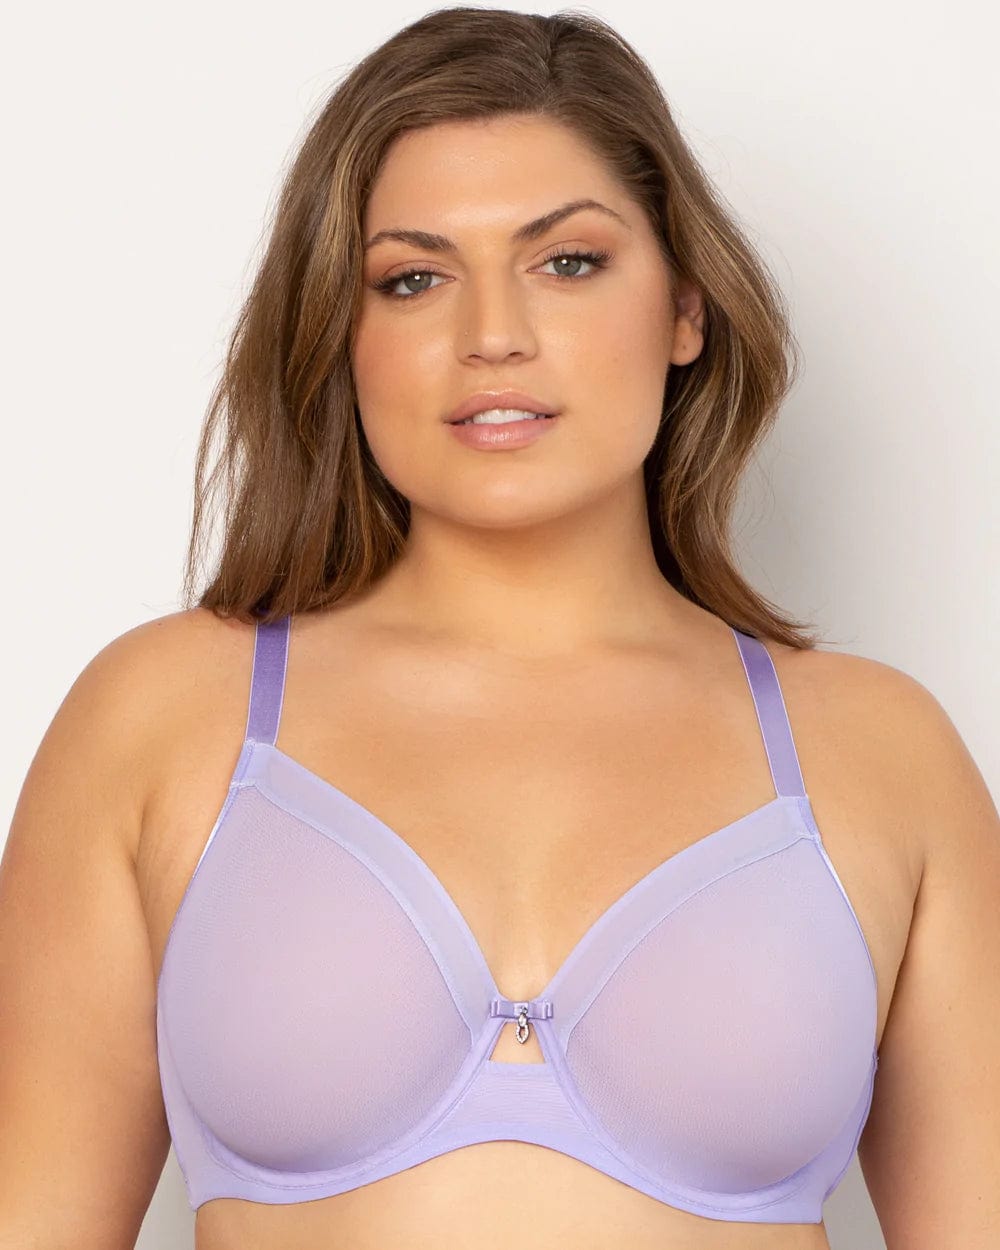 Sheer Mesh Unlined Underwire Bra - Pink - Chérie Amour